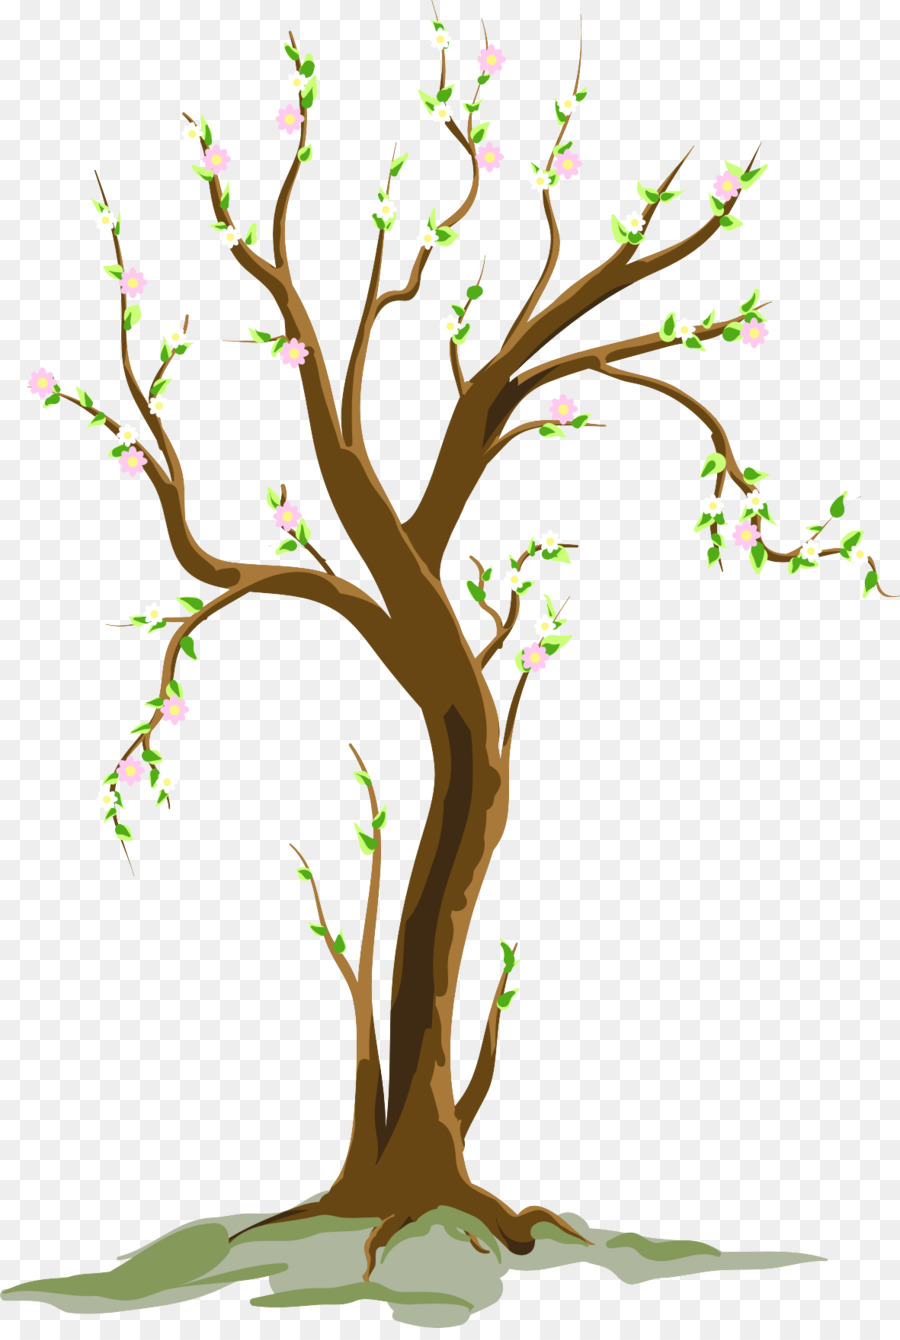 Tree Spring Clip art - Cartoon tree png download - 1181*1742 - Free Transparent Tree png Download.